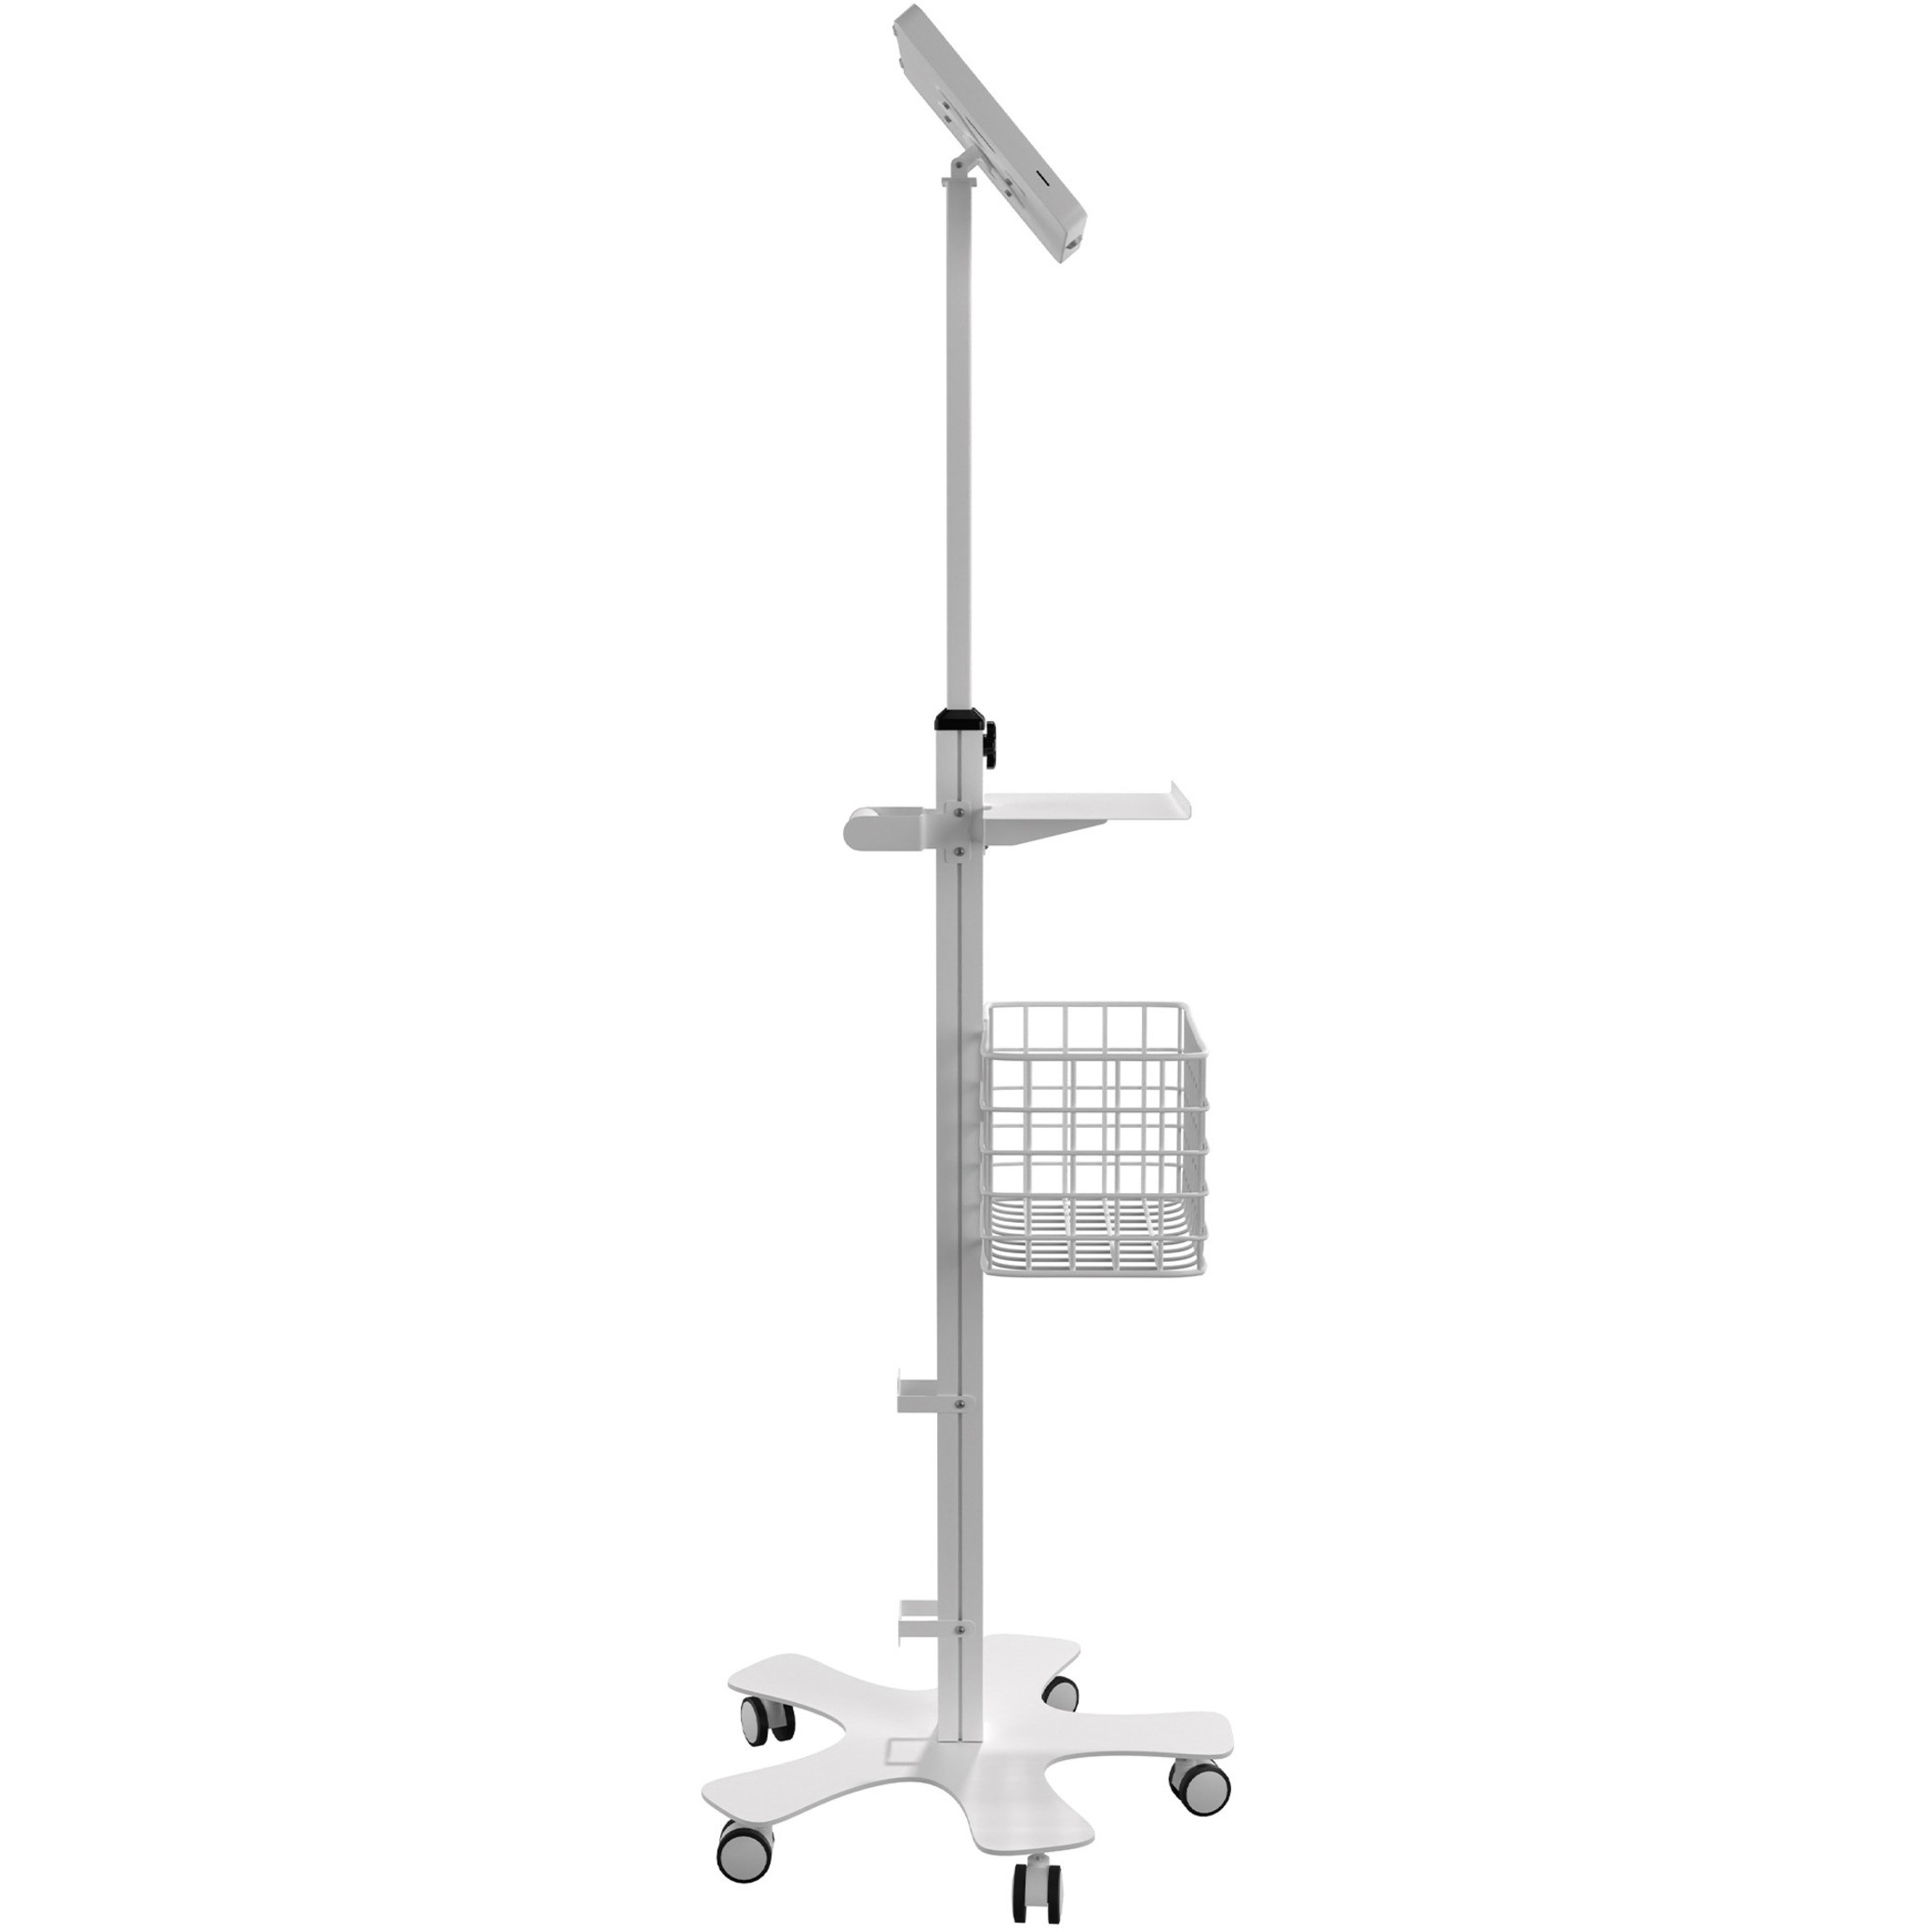 Cta Digital Accessories Medical Mobile Floor Stand with VESA Plate and Paragon EnclosureUp to 11″ Screen Support53.9″ Height x 18.7″ Width x 18.4″ Dep… PAD-MFS